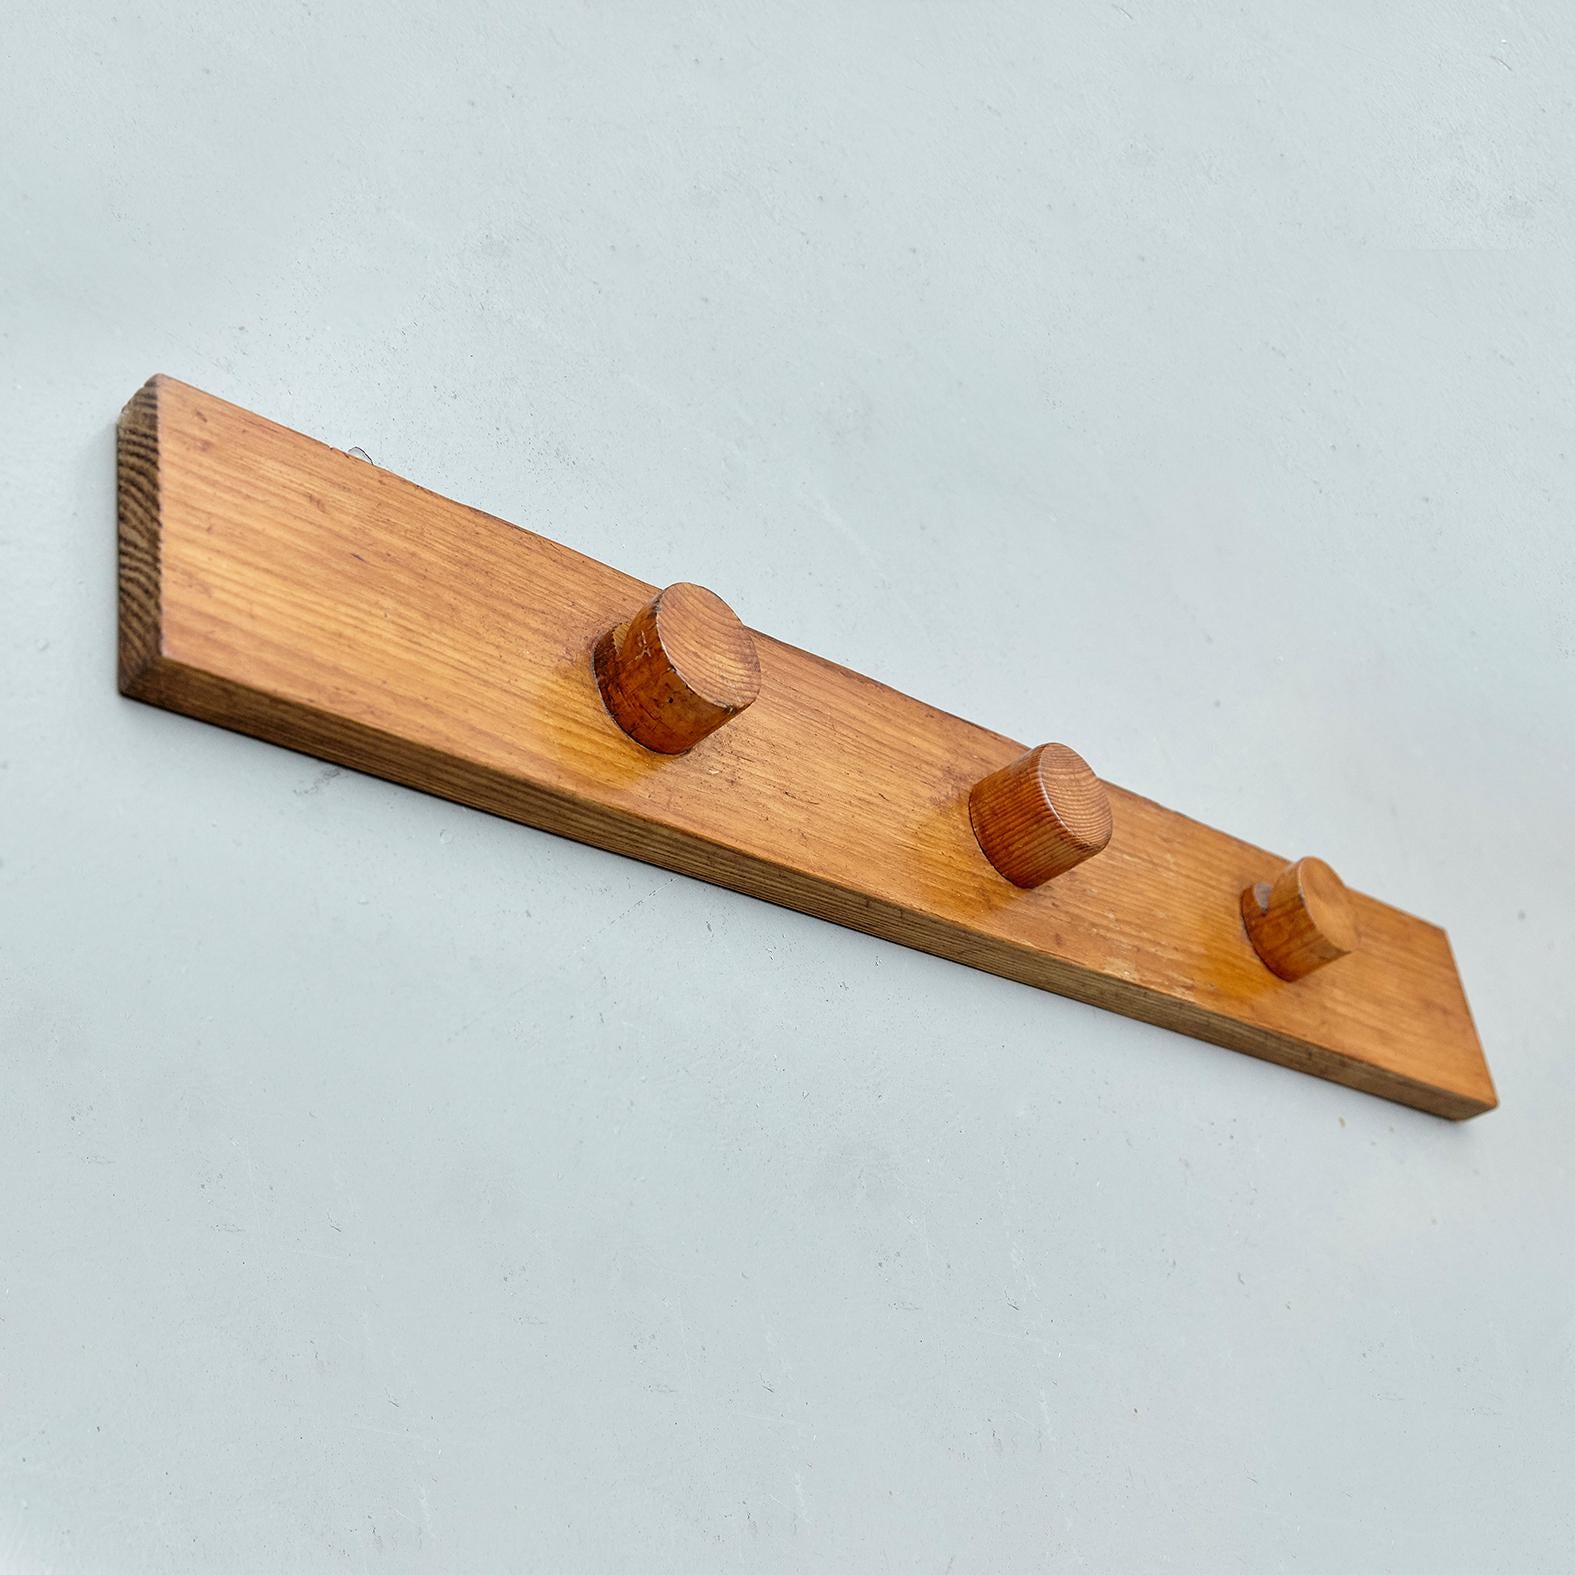 Coat rack designed by Charlotte Perriand for Les Arcs ski resort circa 1960, manufactured in France.
Pinewood.

In good original condition, with minor wear consistent with age and use, preserving a beautiful patina.

Charlotte Perriand